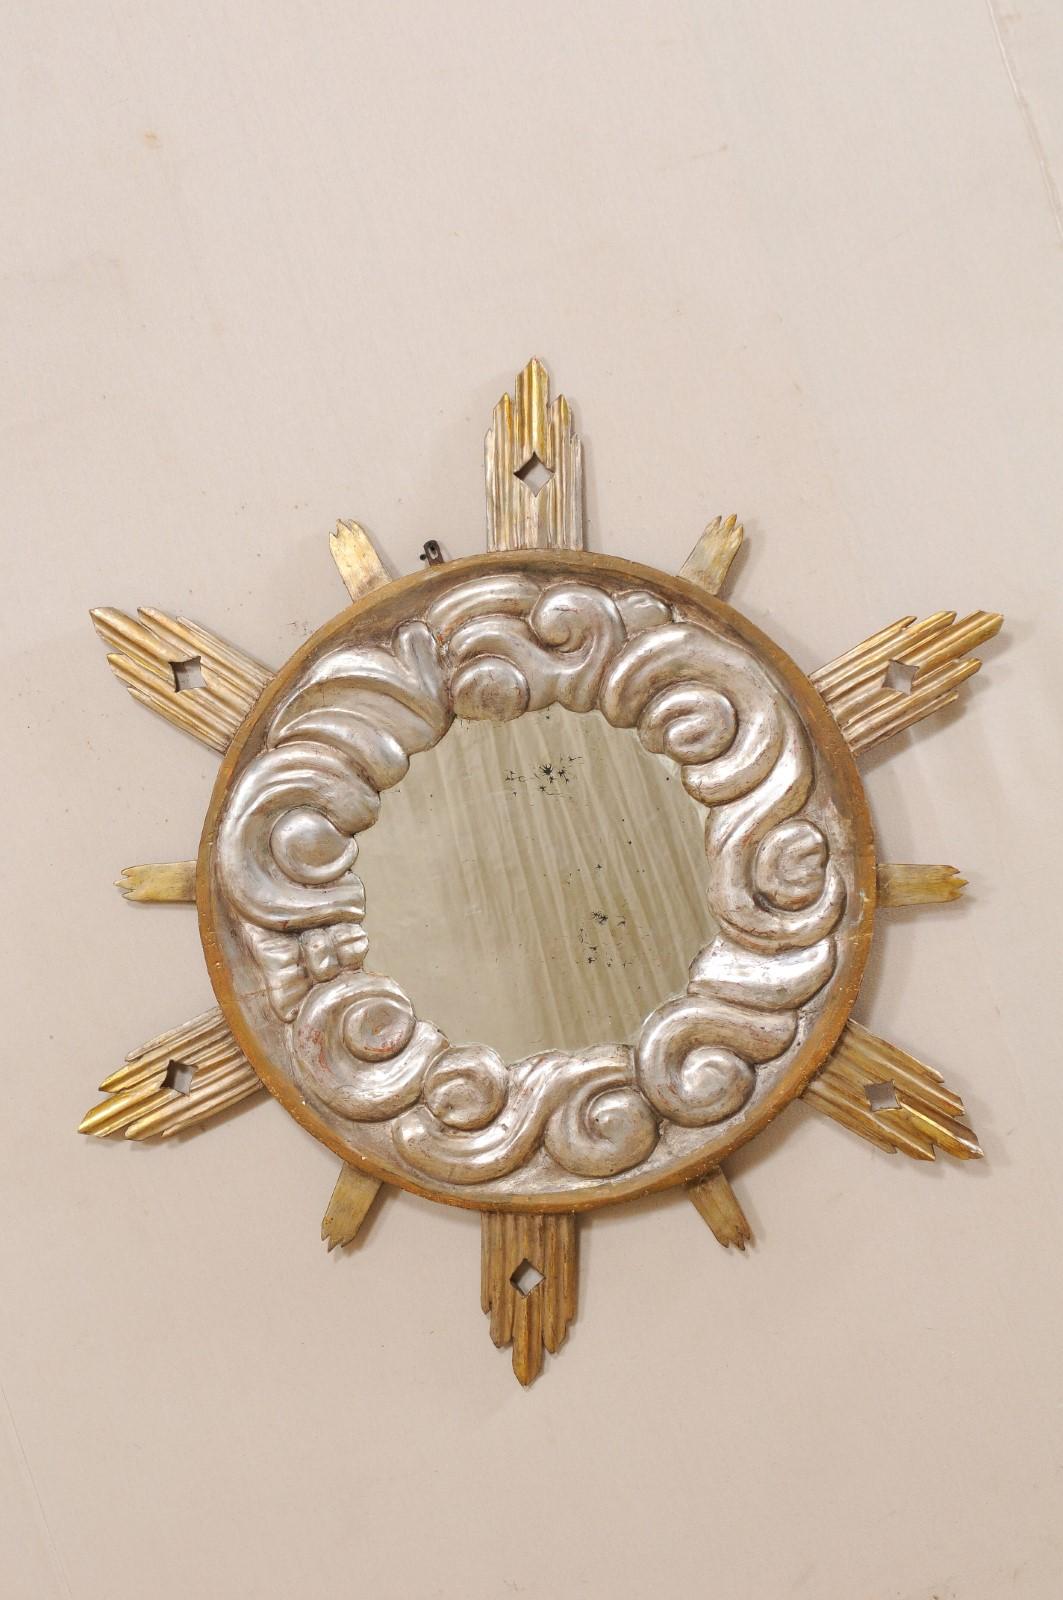 An exquisite larger size Italian cloudy sunburst mirror from the 19th century. This antique mirror from Italy features a circle-shaped frame with silver colored cloudy surround, with gilded sun-rays emerging outward in varying lengths, with the